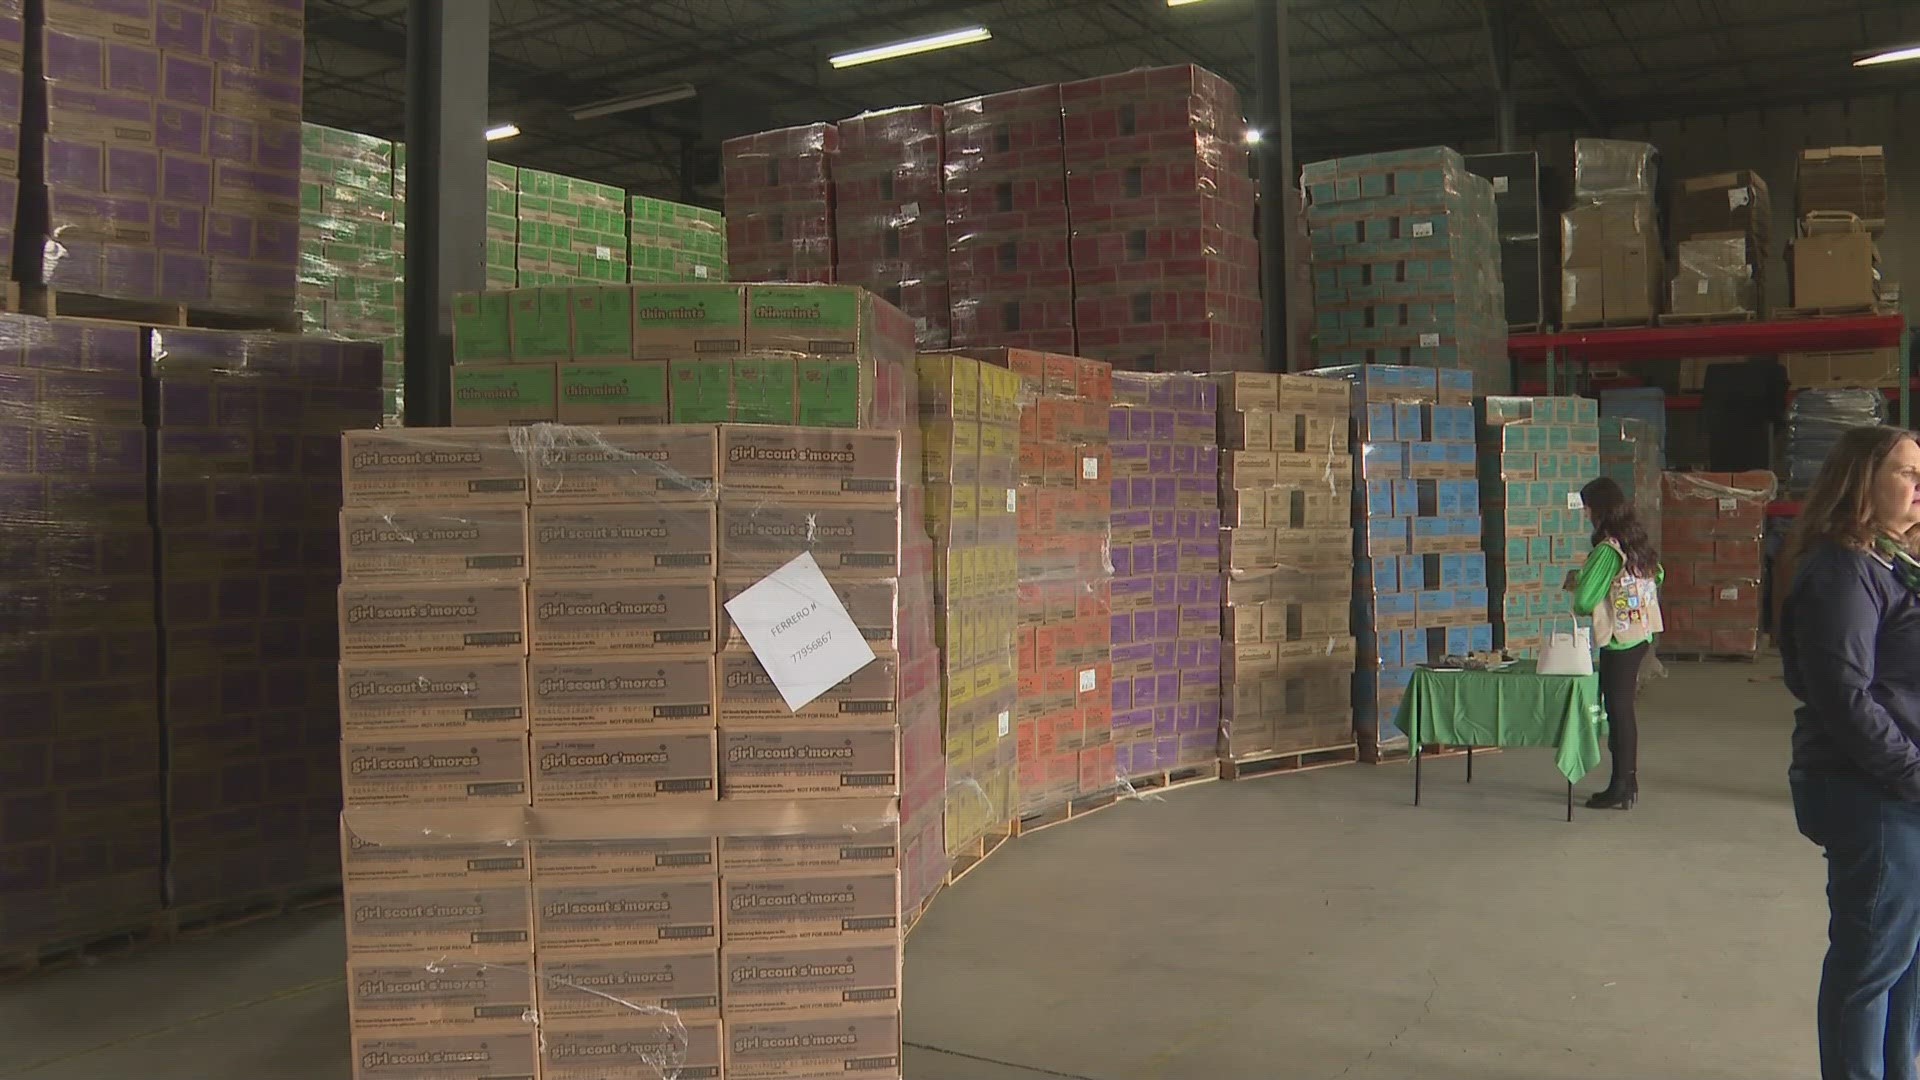 The cookie warehouse, over on Bluegrass Parkway, will see more than 1 million boxes of cookies from March 16-April 30.